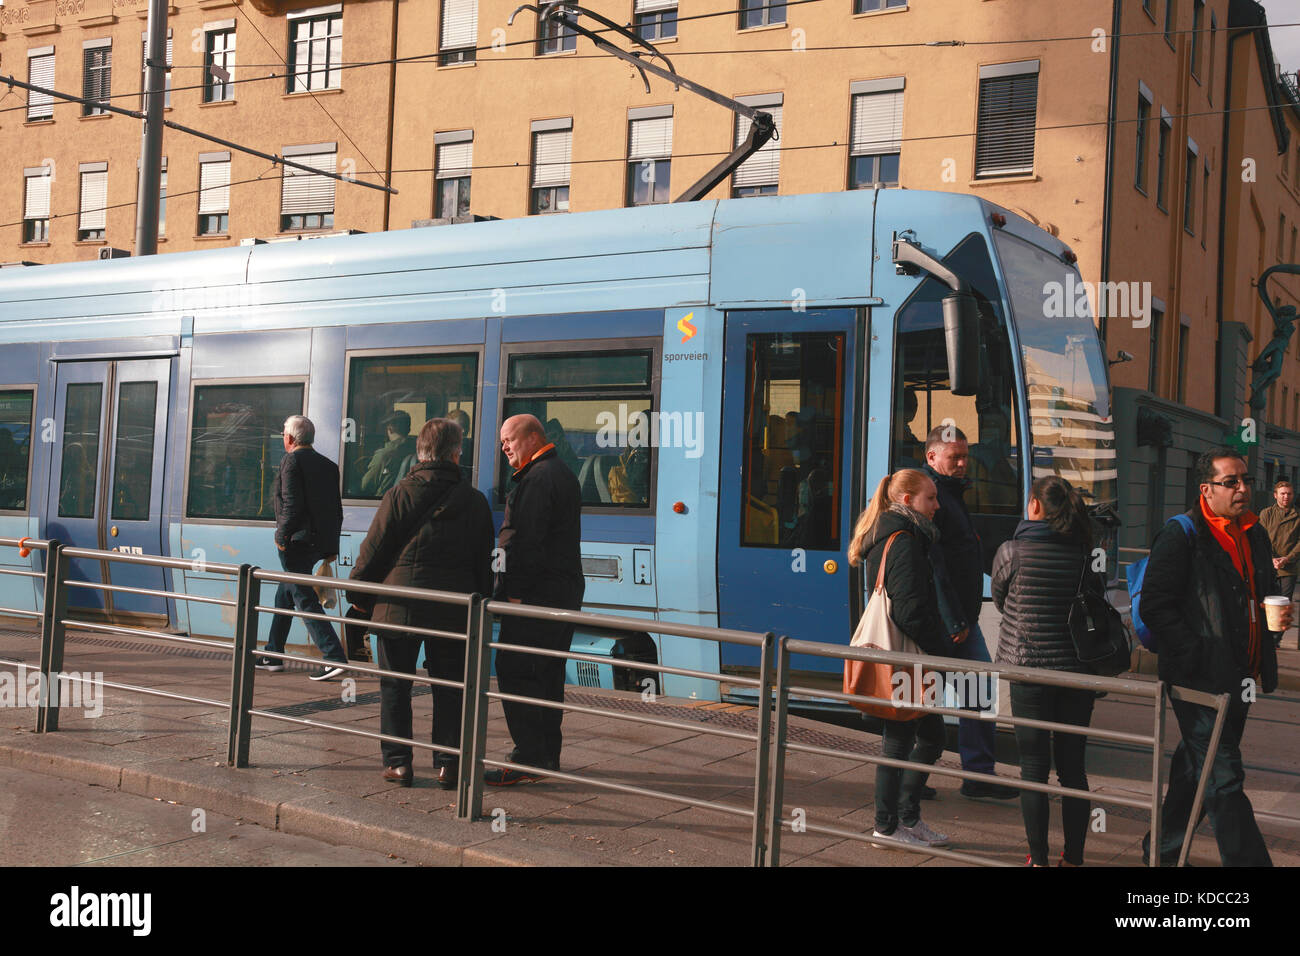 Jernbanetorget tram stop in the centre of Oslo, Norway Stock Photo